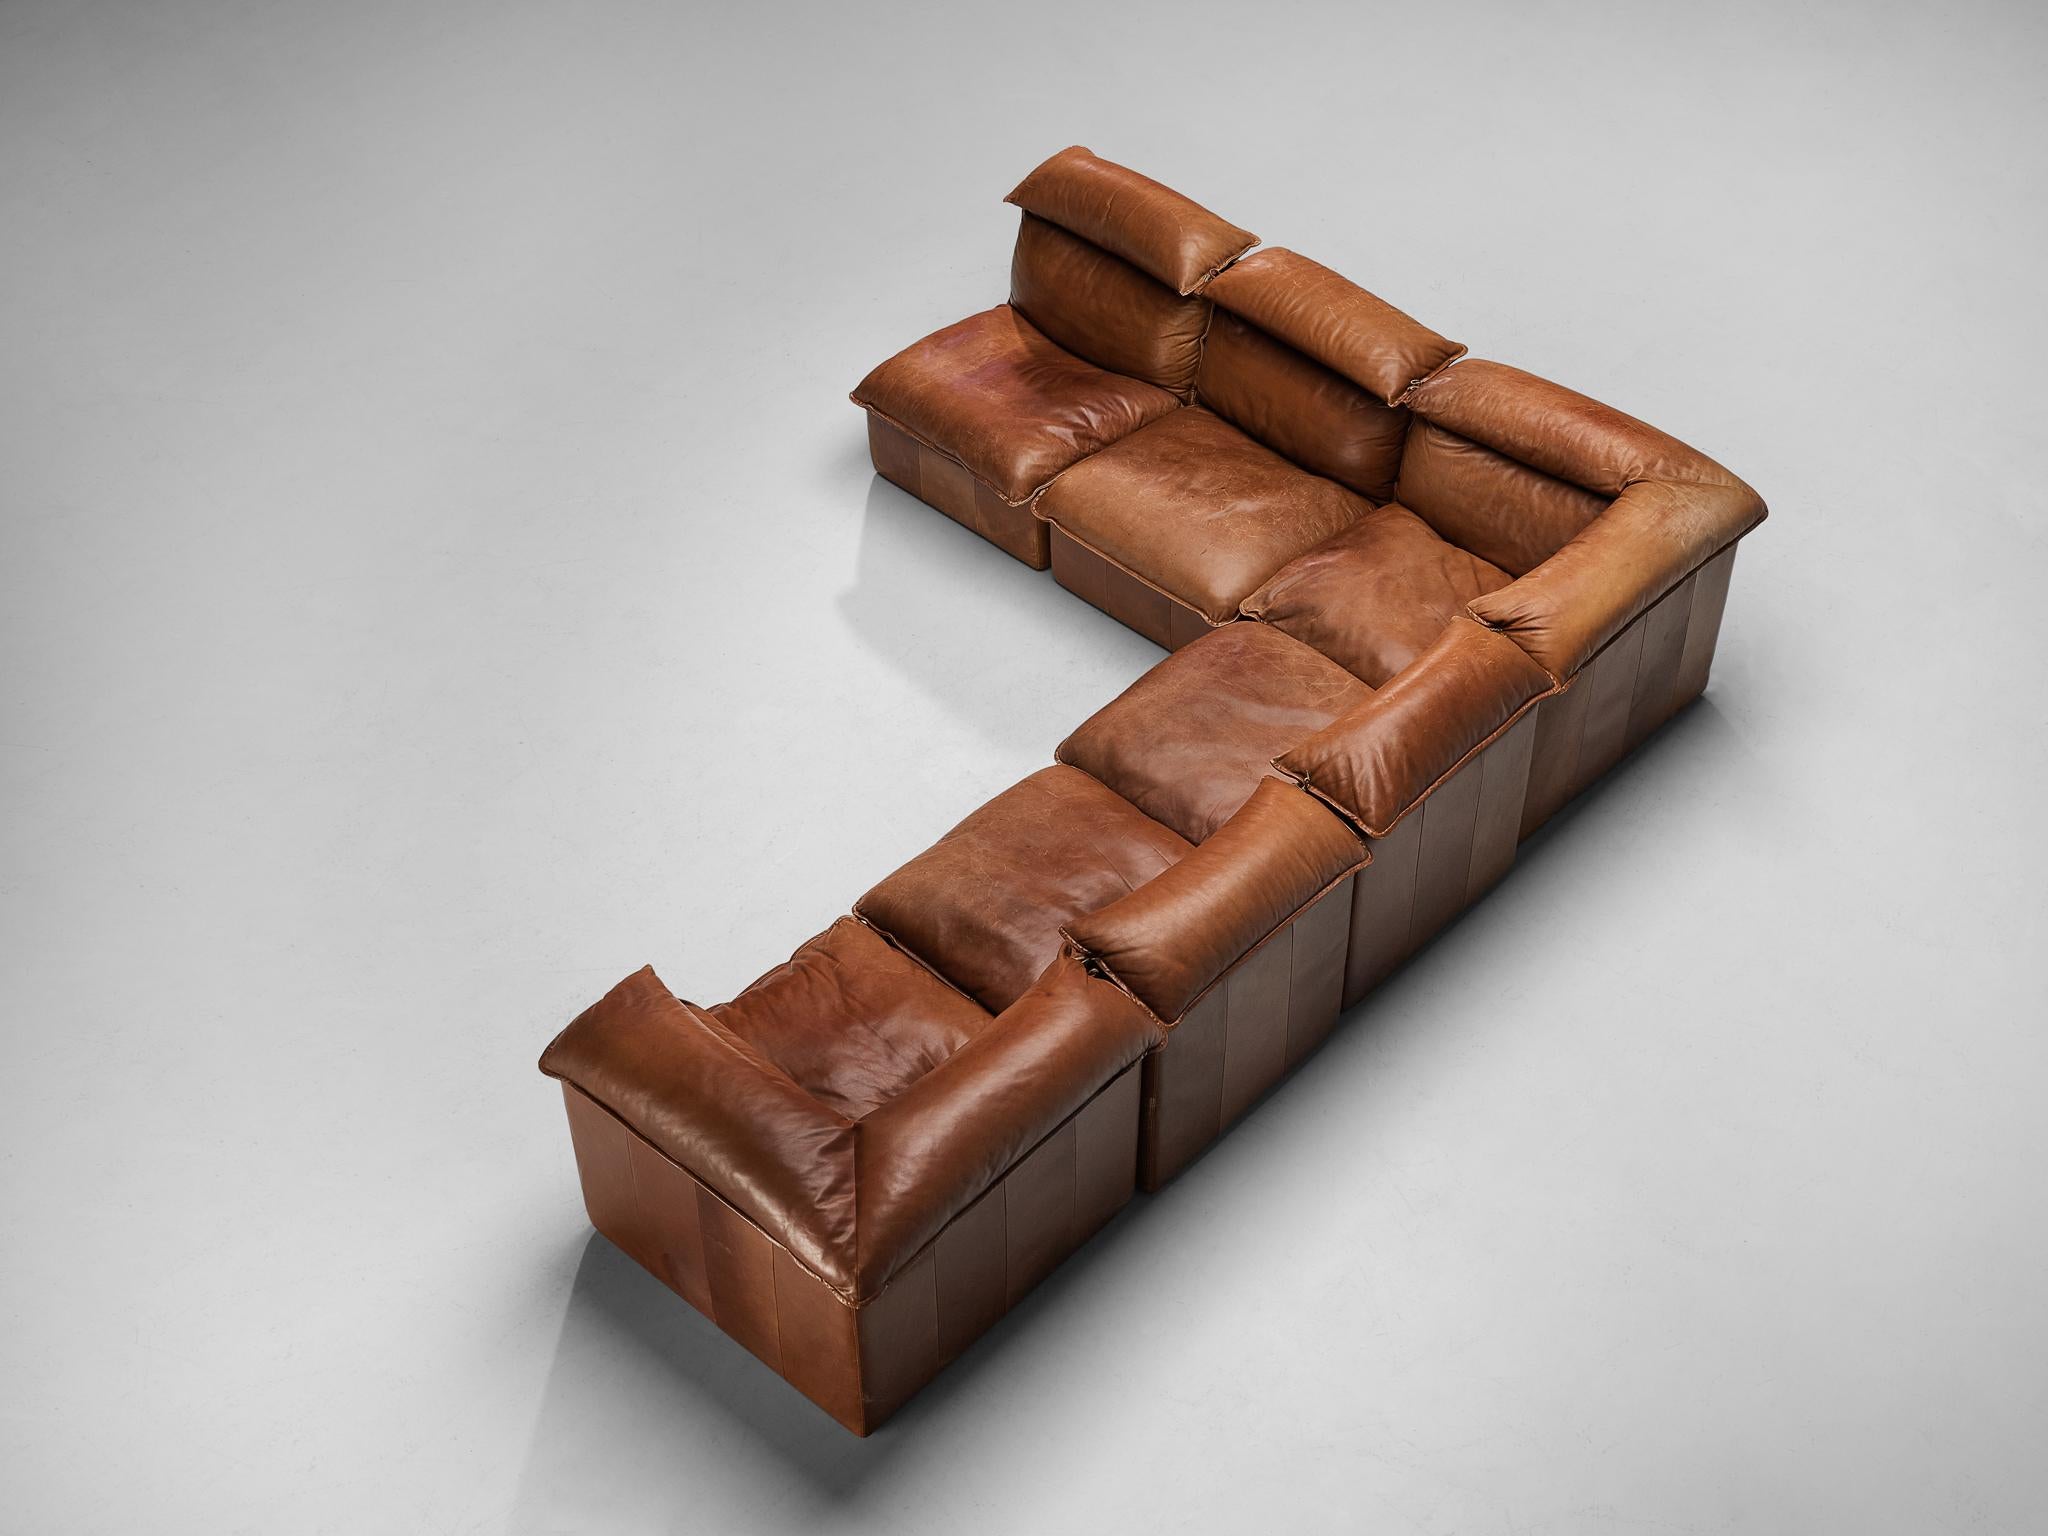 Sectional sofa, leather, Europe, 1970s.

Bulky yet elegant, this well-designed sofa is executed in warm cognac leather with age-appropriate, admirable patina that gives this piece of furniture a strong and naturalistic character. This sofa is